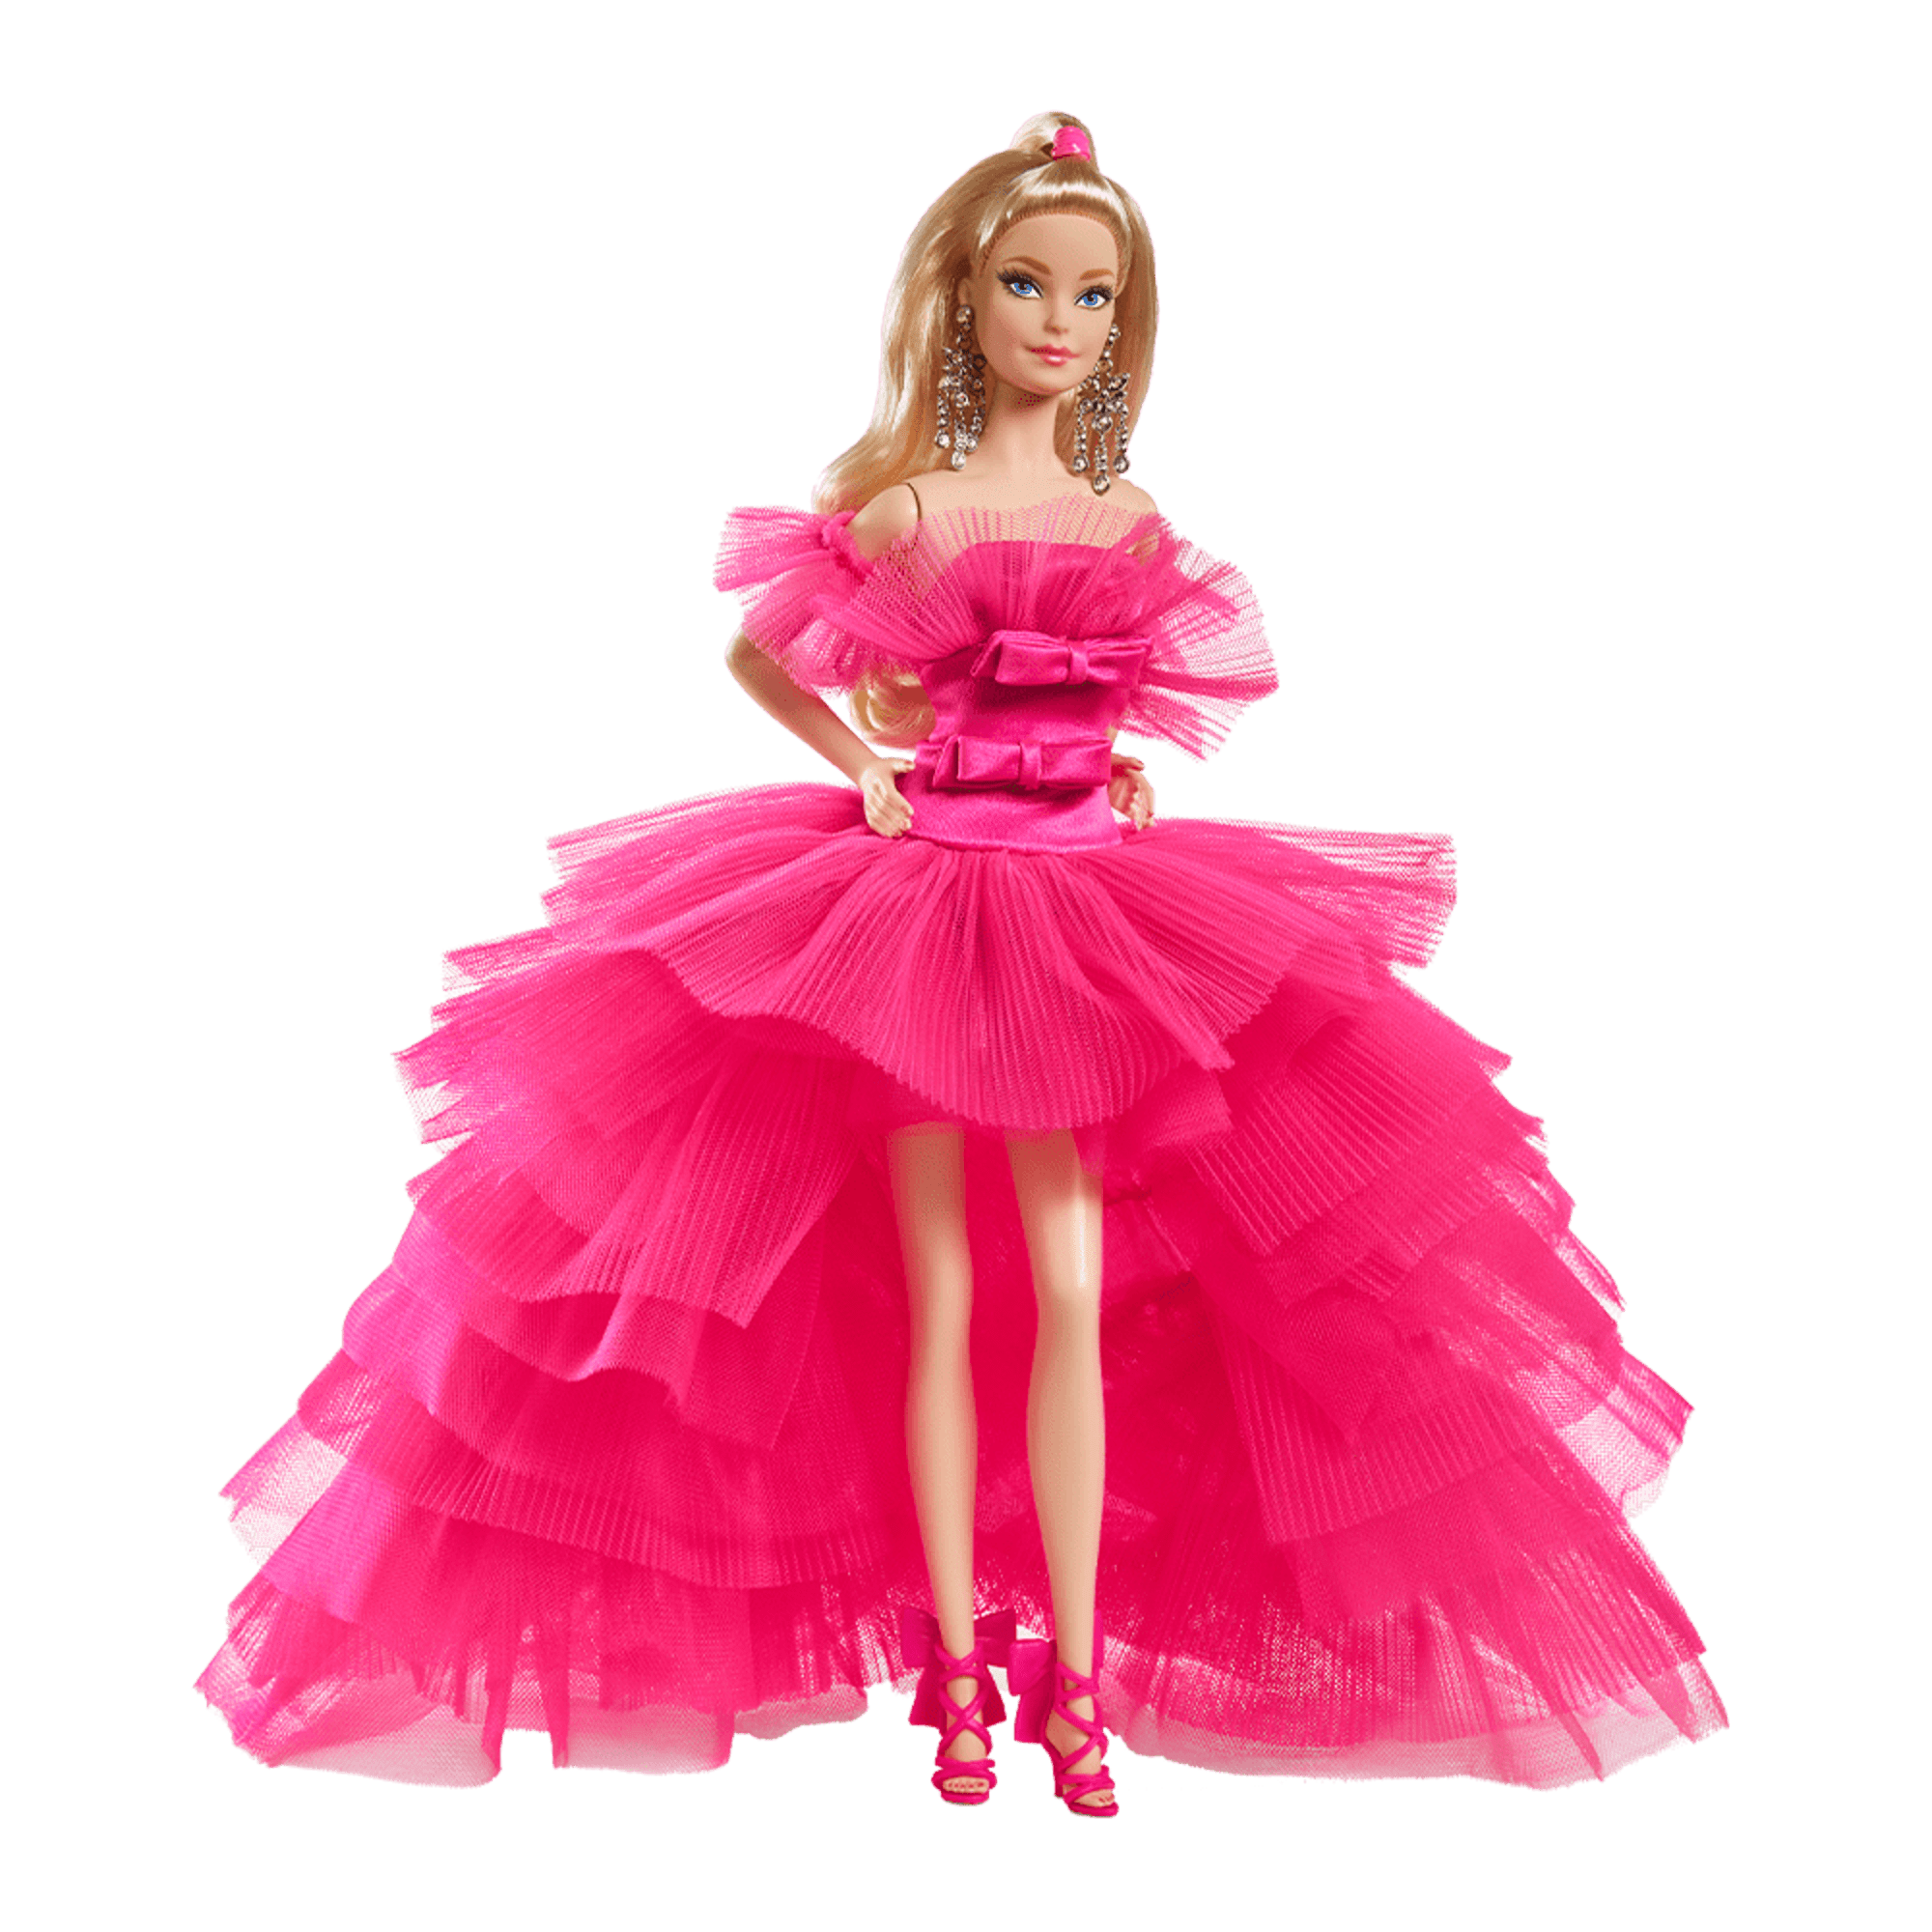 Barbie Pink Collection Doll - Pink Premiere